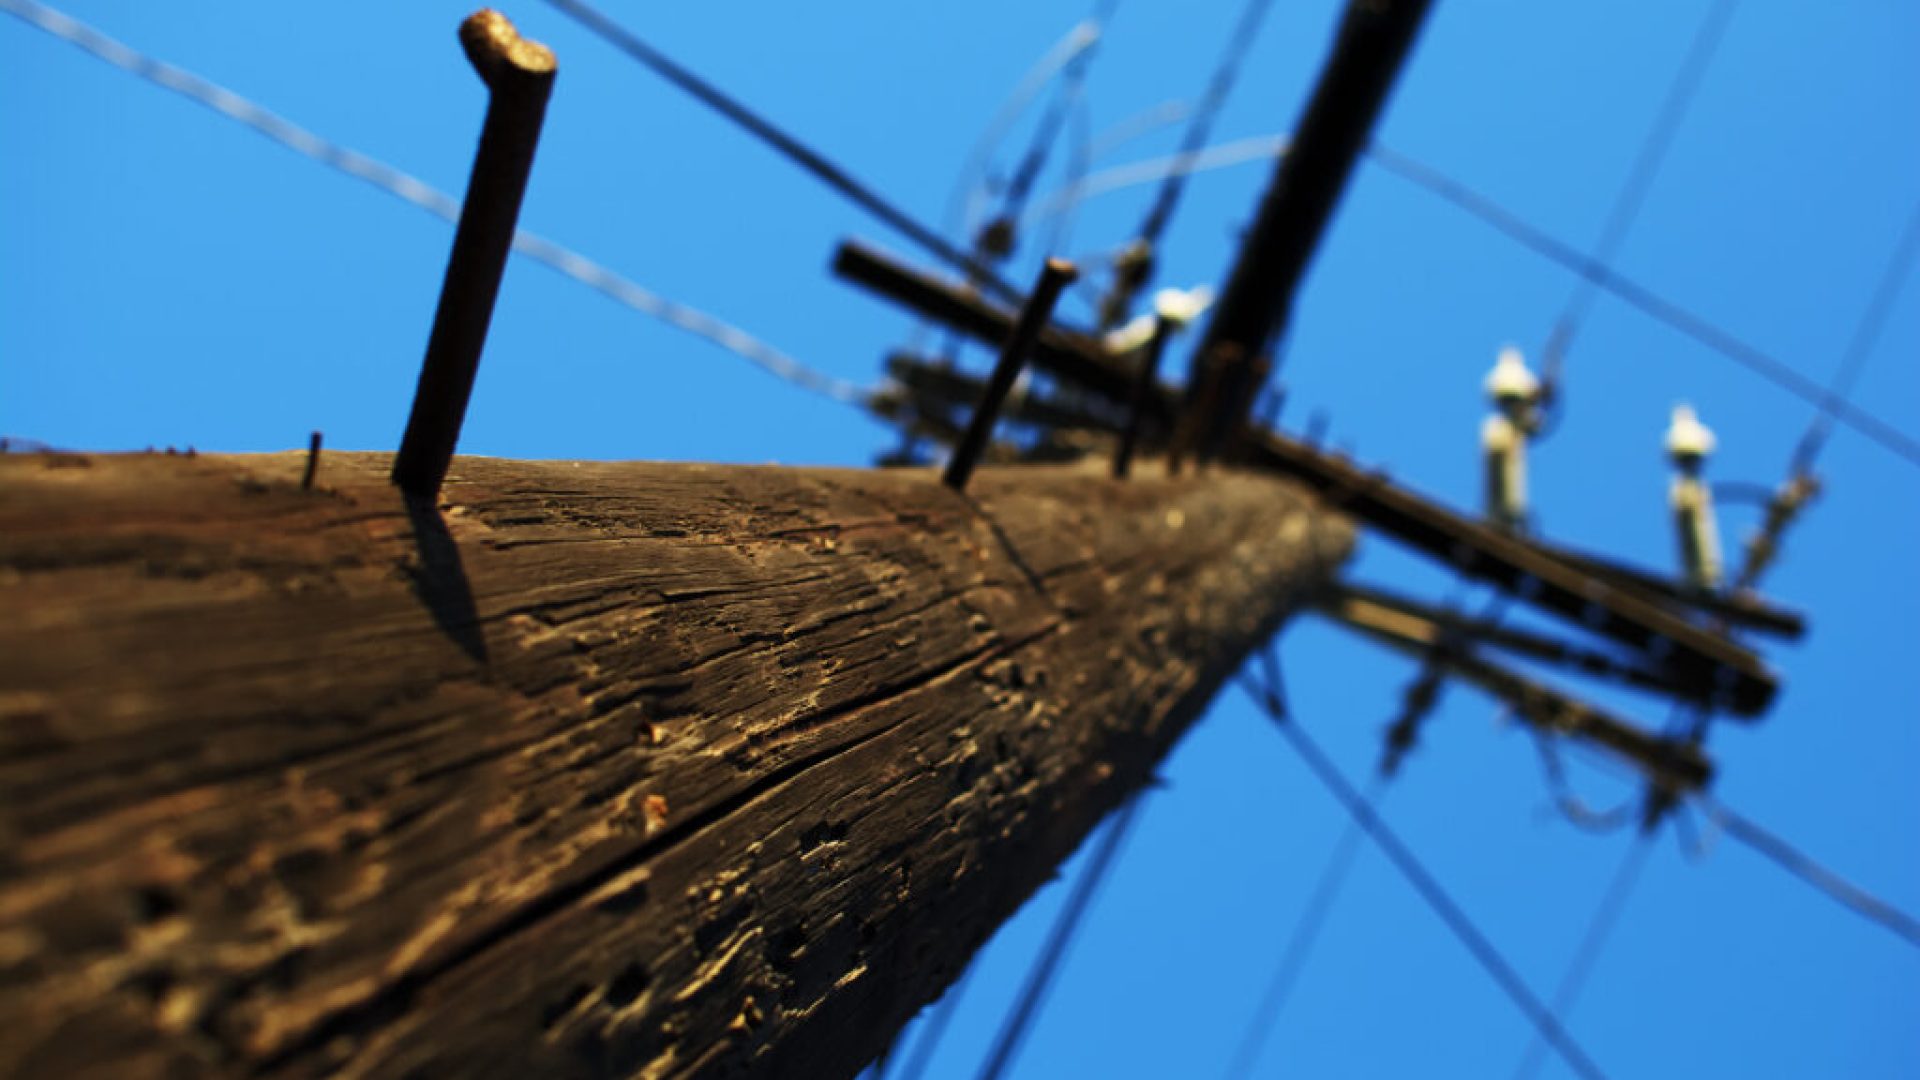 A power pole in Nome. KNOM stock photo.